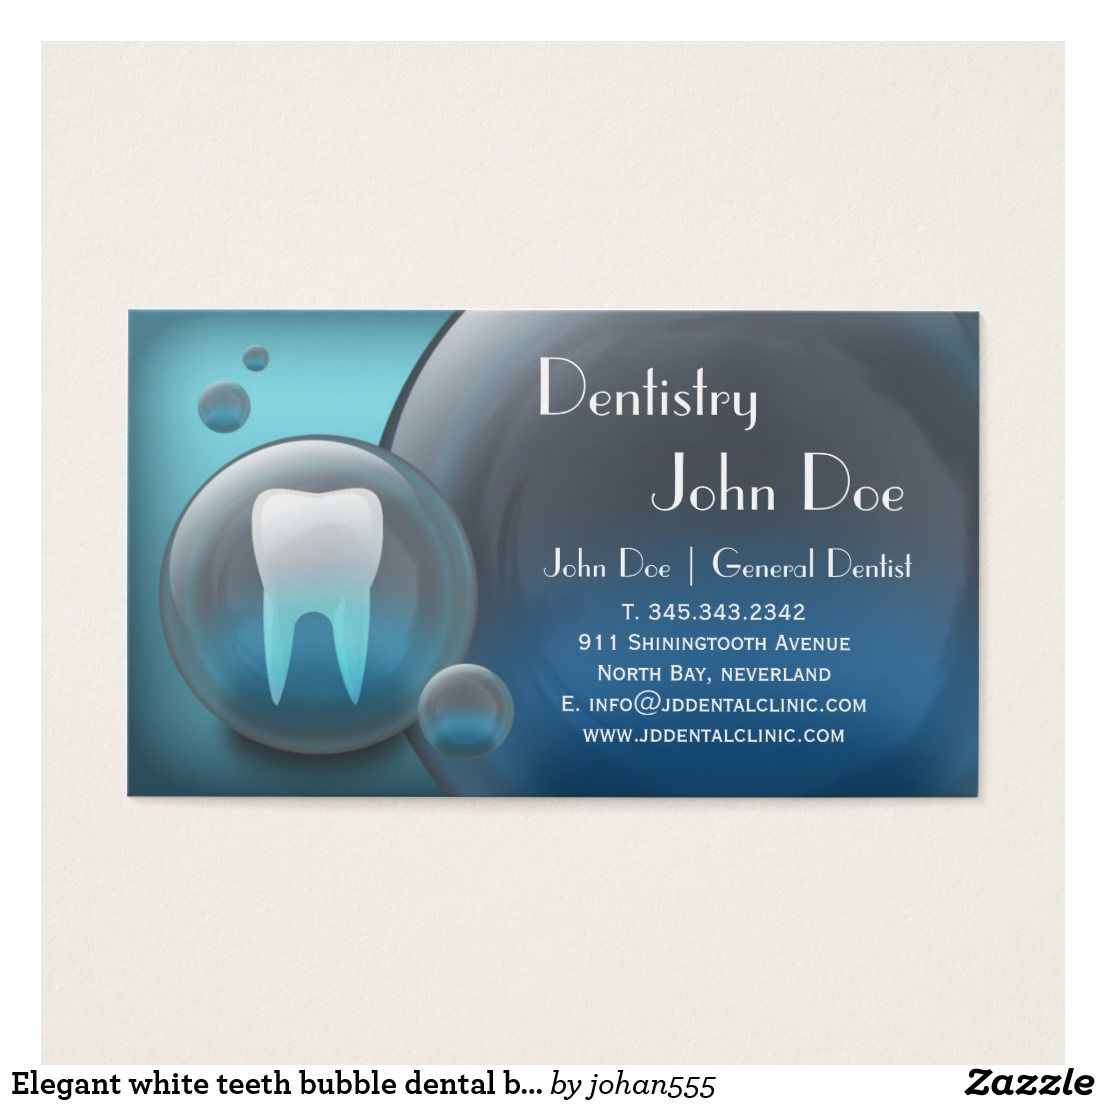 teeth whitening business cards 1